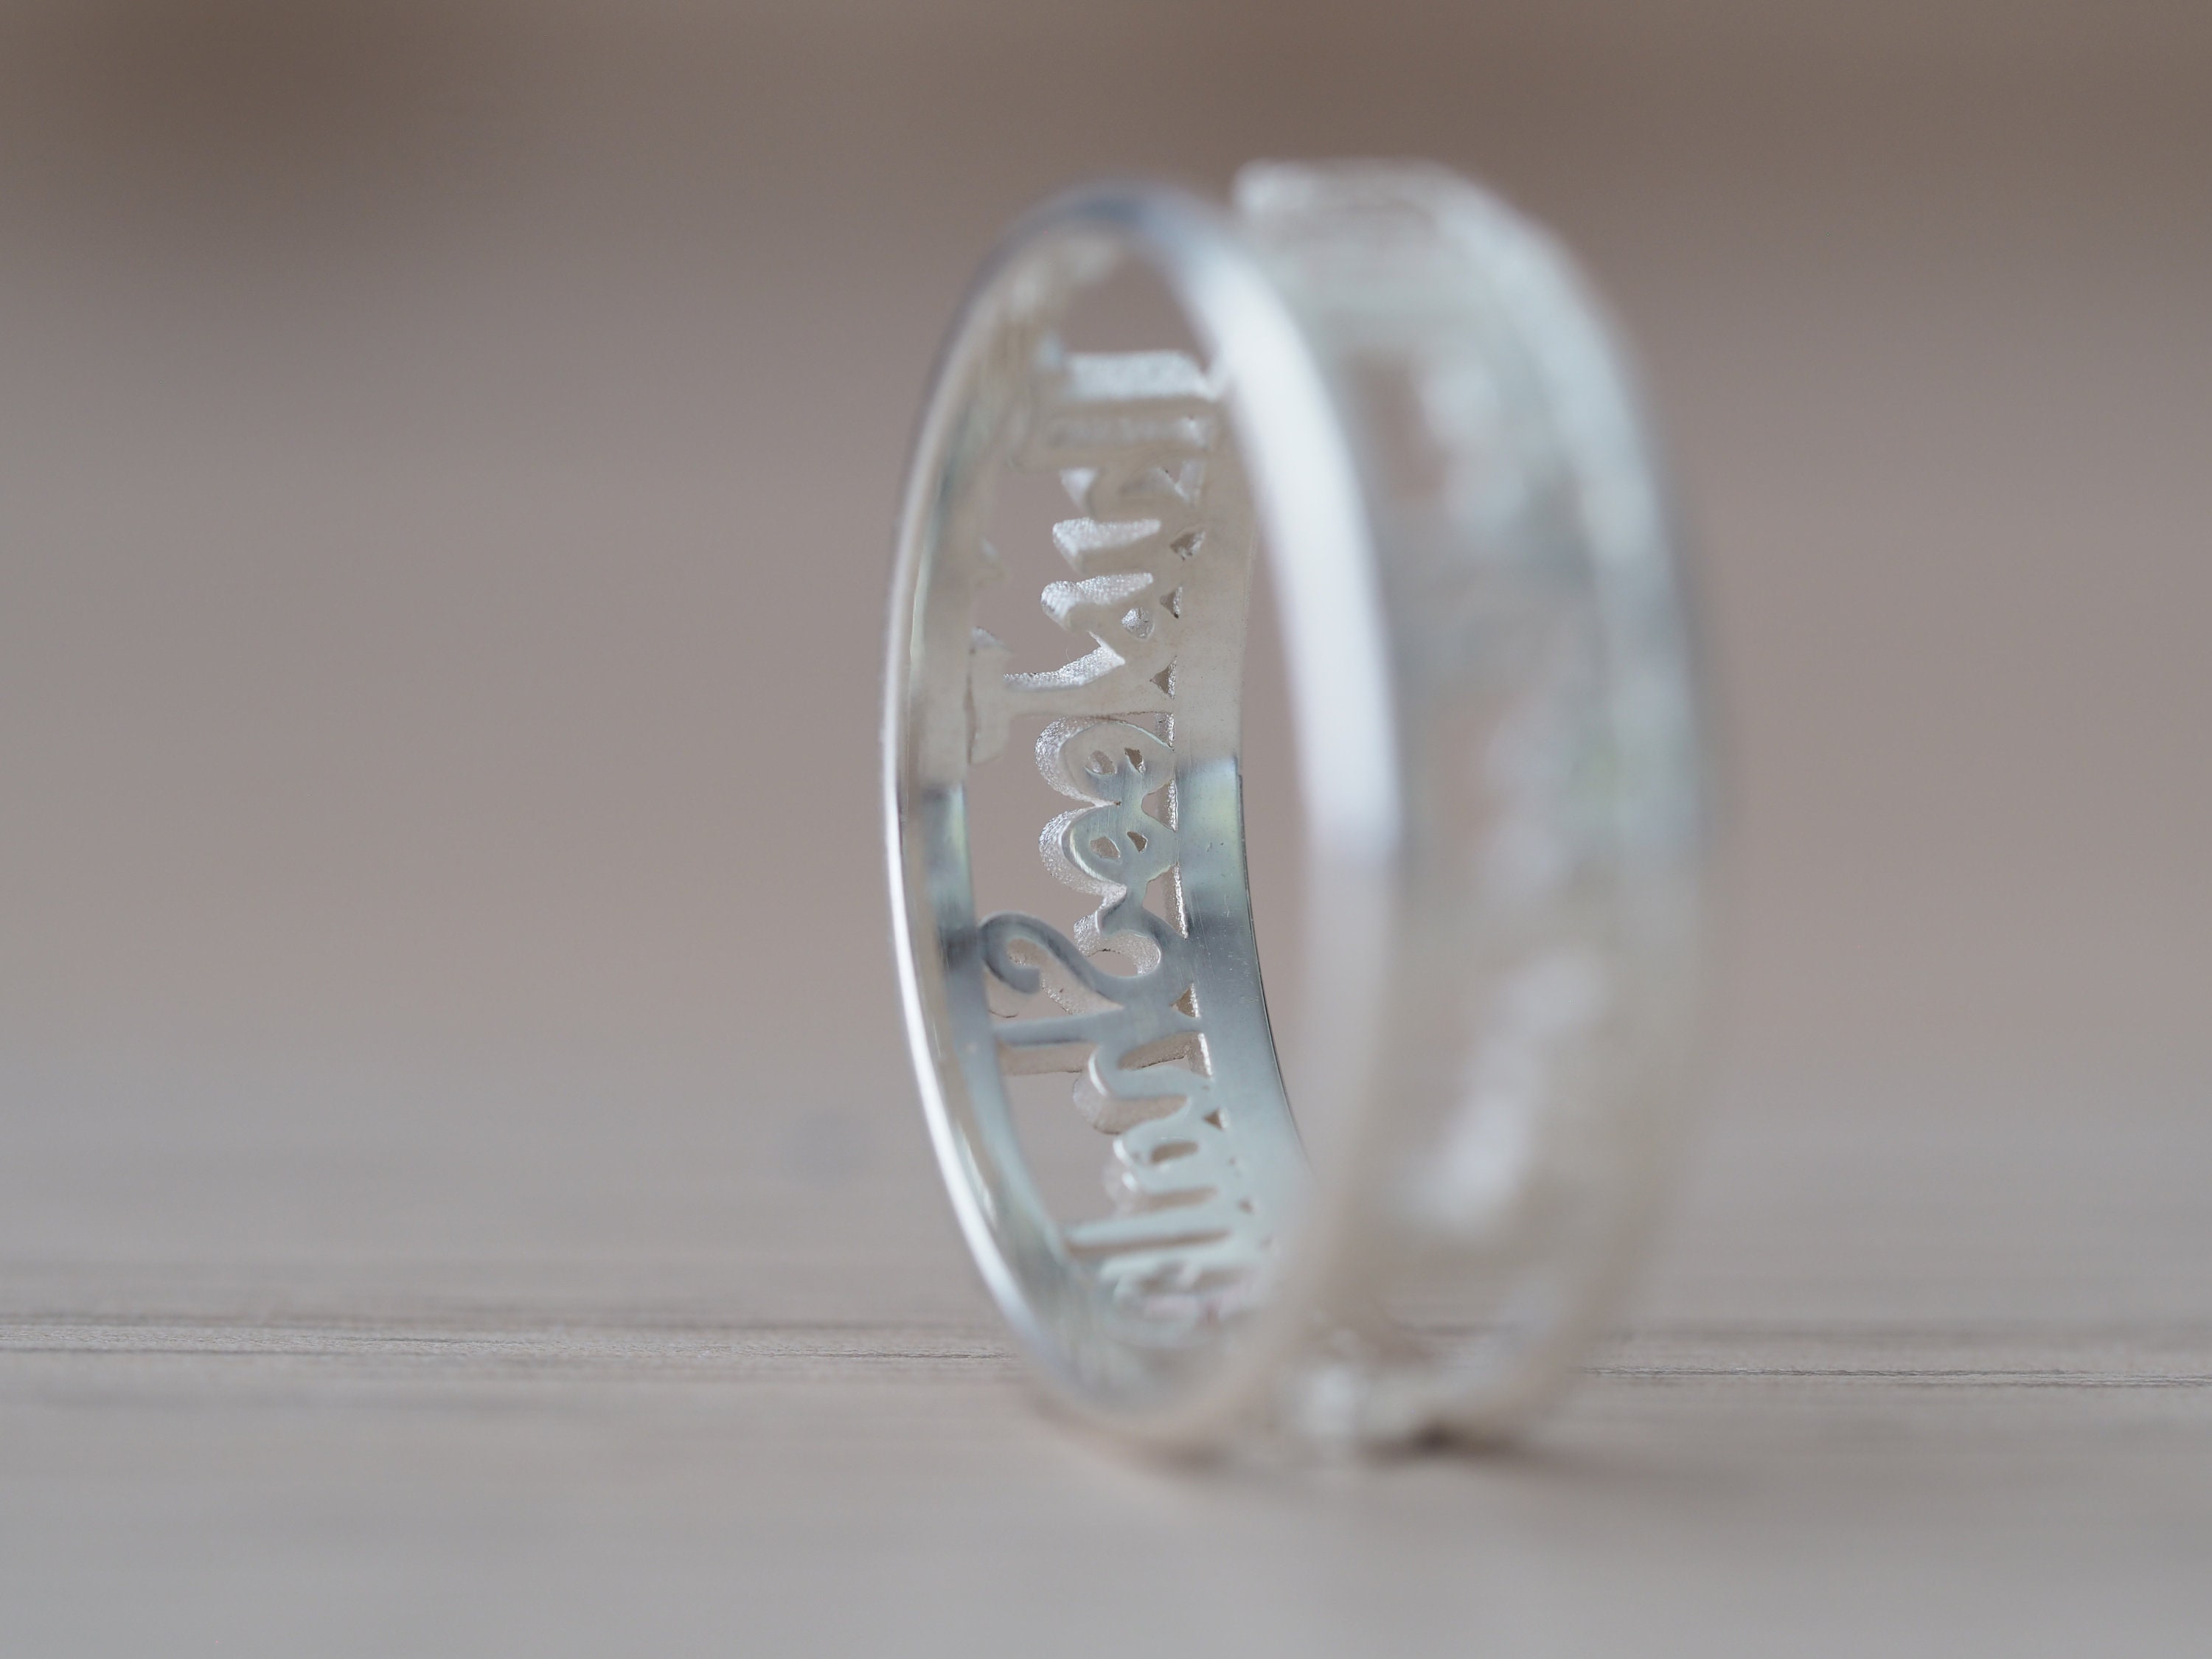 2 RINGS ‘THIS TOO SHALL PASS’ RING SIMILAR TO ‘I Am enough’ Hope Dream UK Sale 